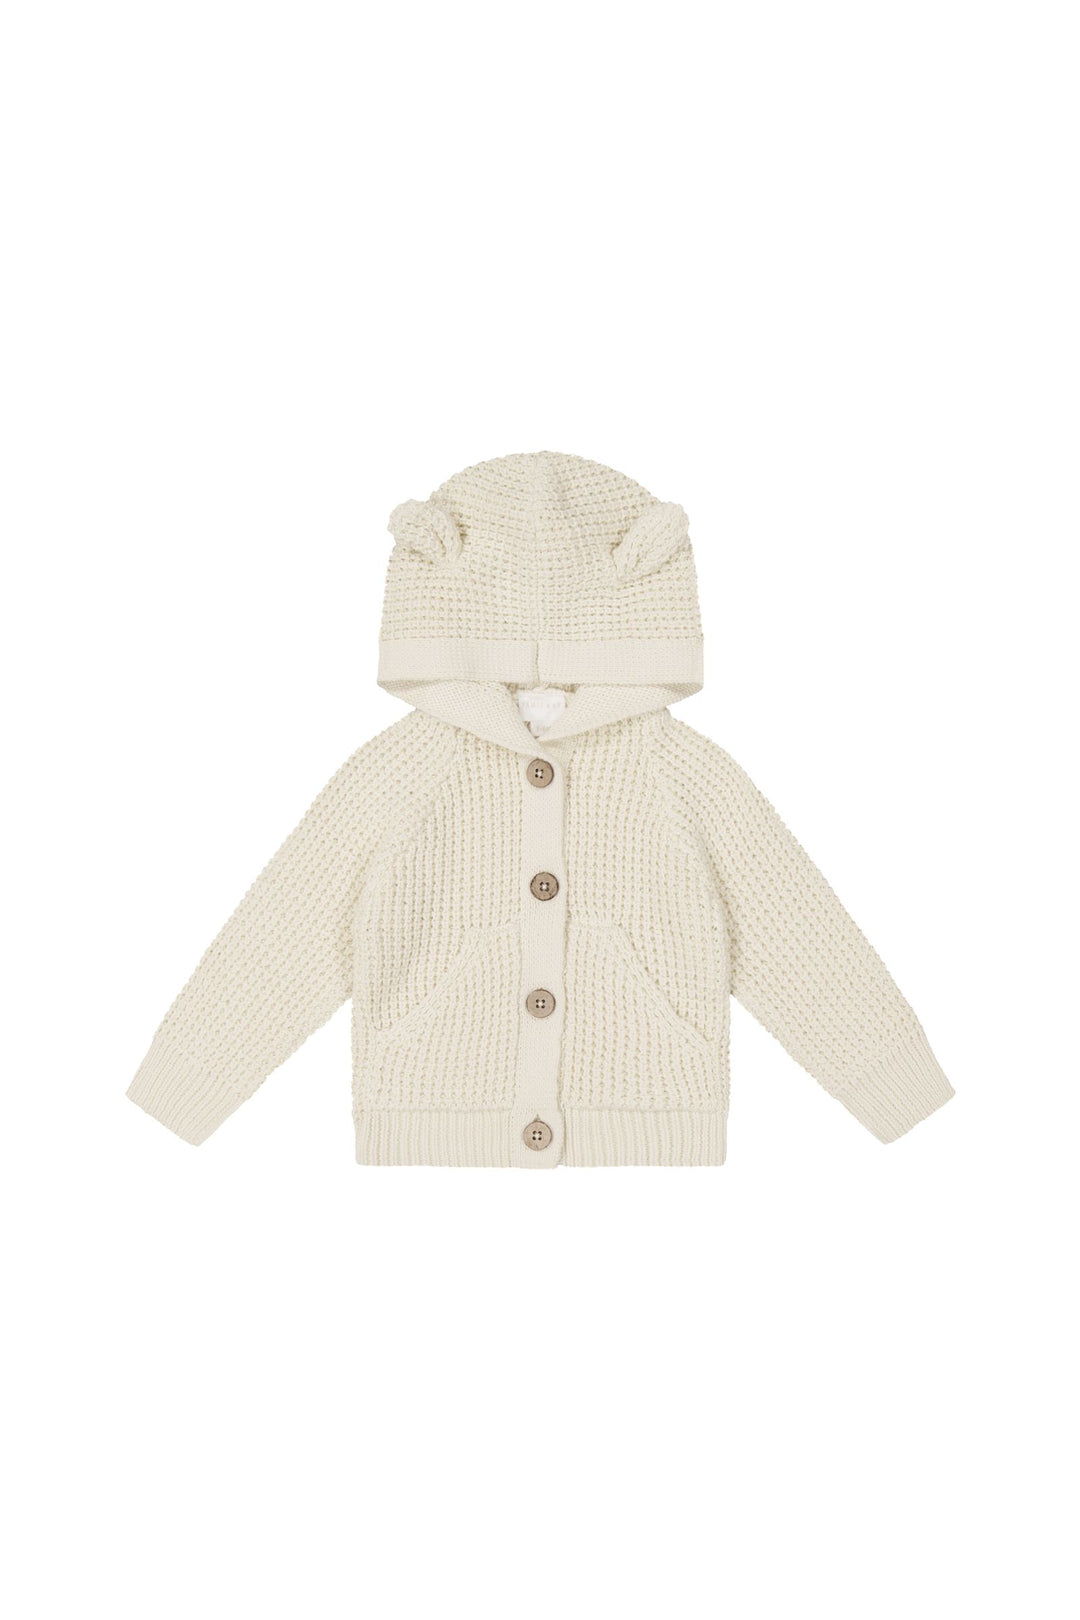 connor knitted bear cardigan - oat - JL & CO. boutique 